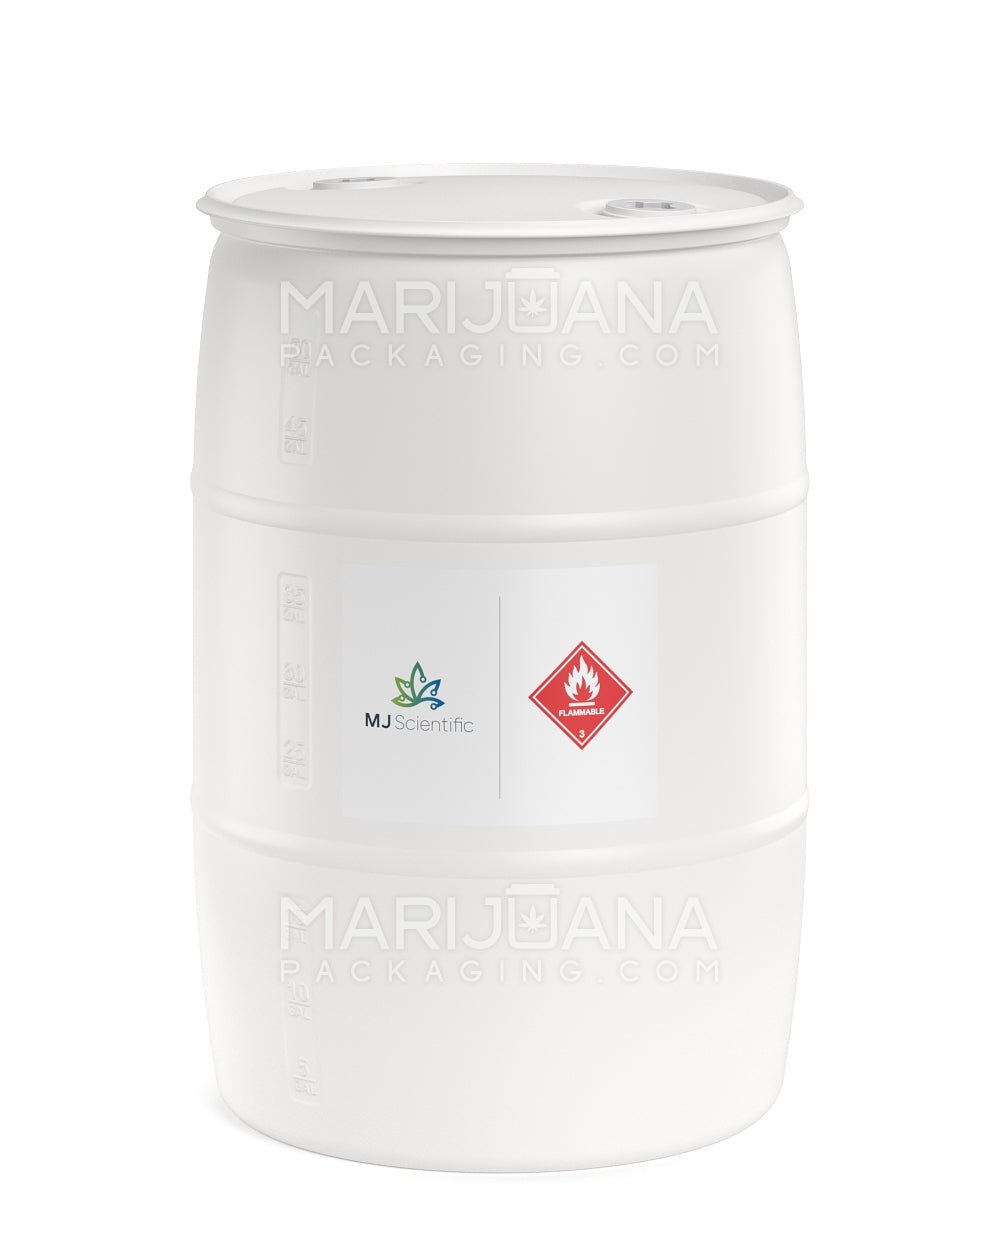 MJ SCIENTIFIC | Liquid Drum 70% Isopropyl Alcohol Tech Grade Cleaning & Extraction Solvent | 390lb Net - 55 Gallons - 1